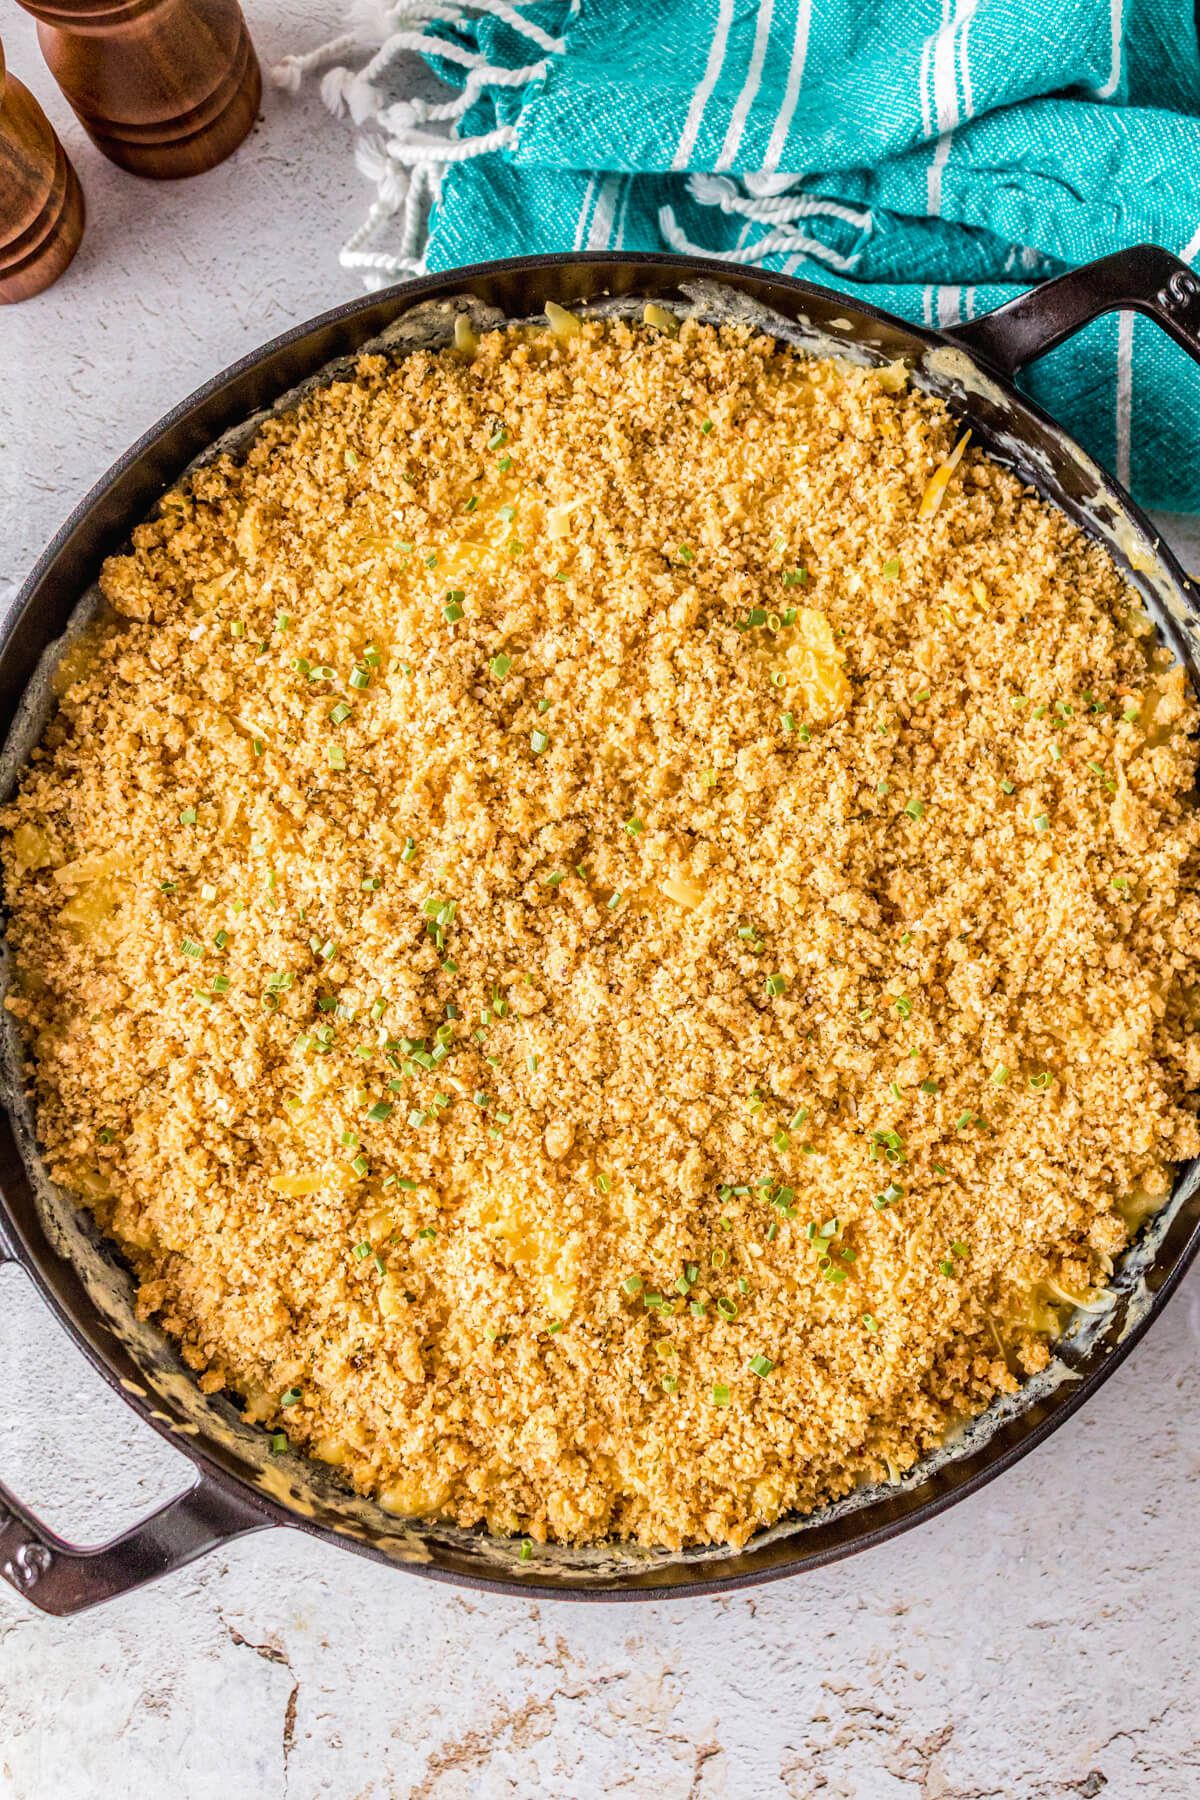 A black cast iron pan full of creamy Smoked Mac and Cheese topped with toasted golden bread crumbs.